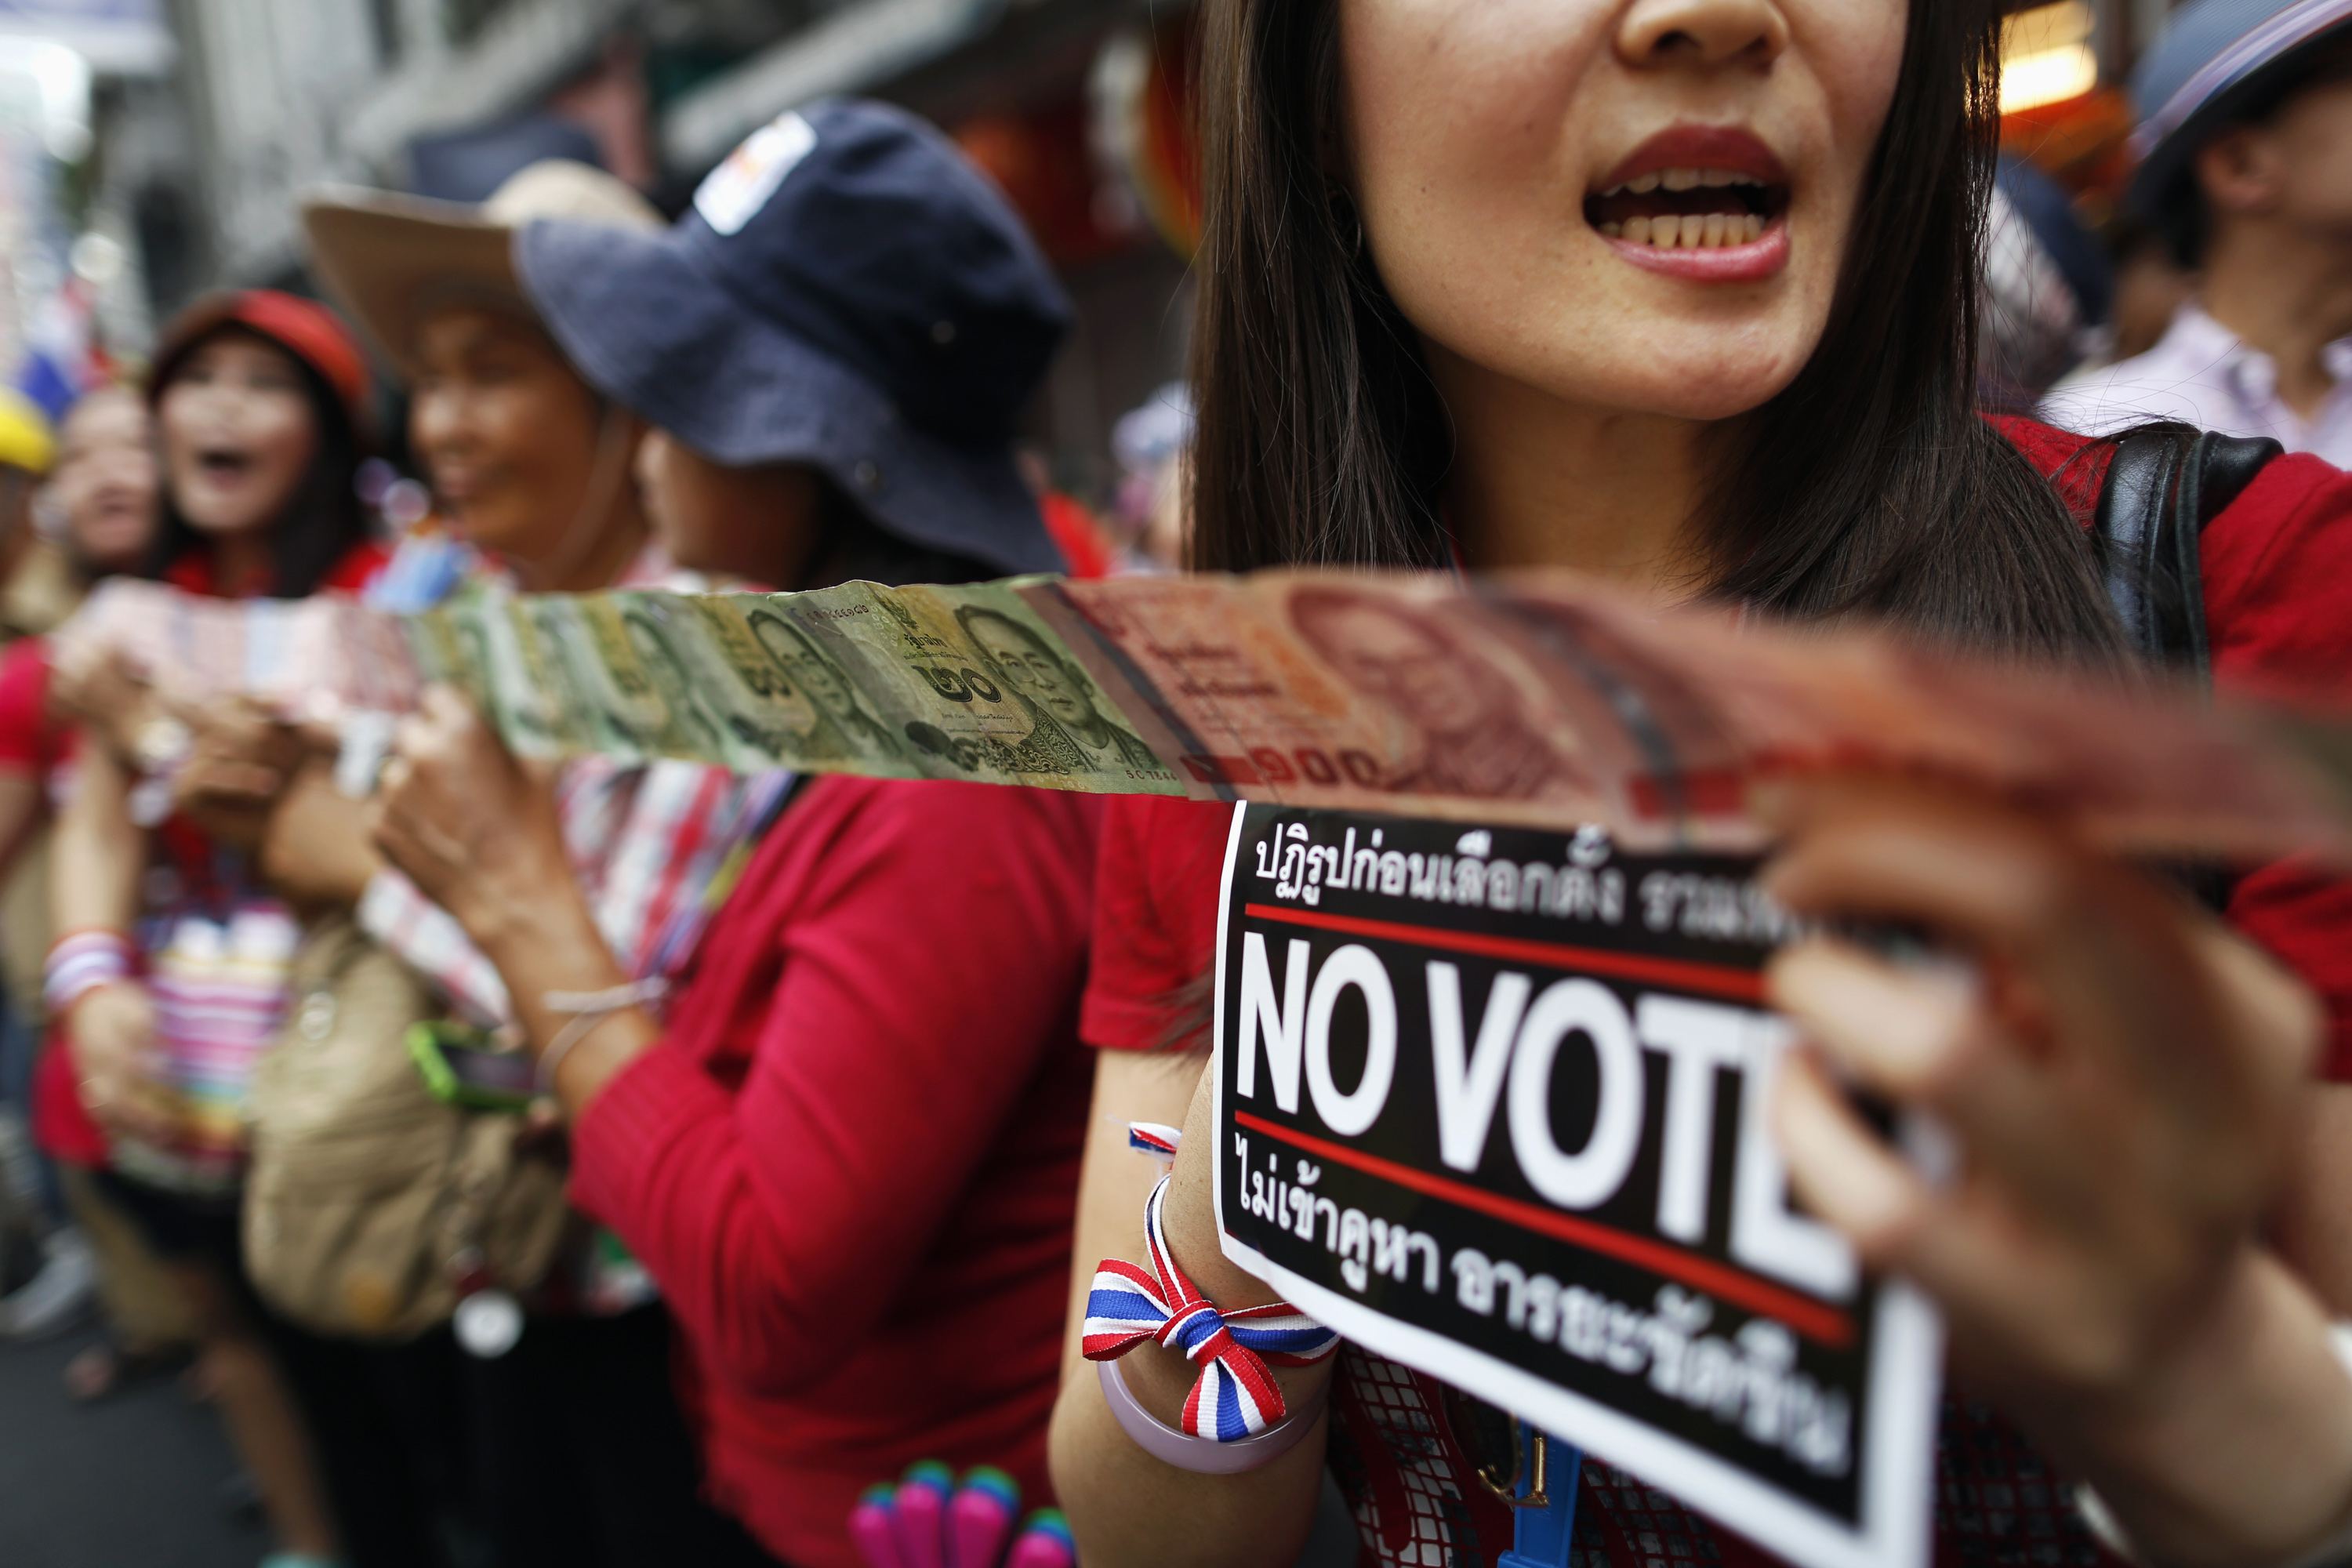 Thai protesters march as poll official says some ballot deliveries blocked